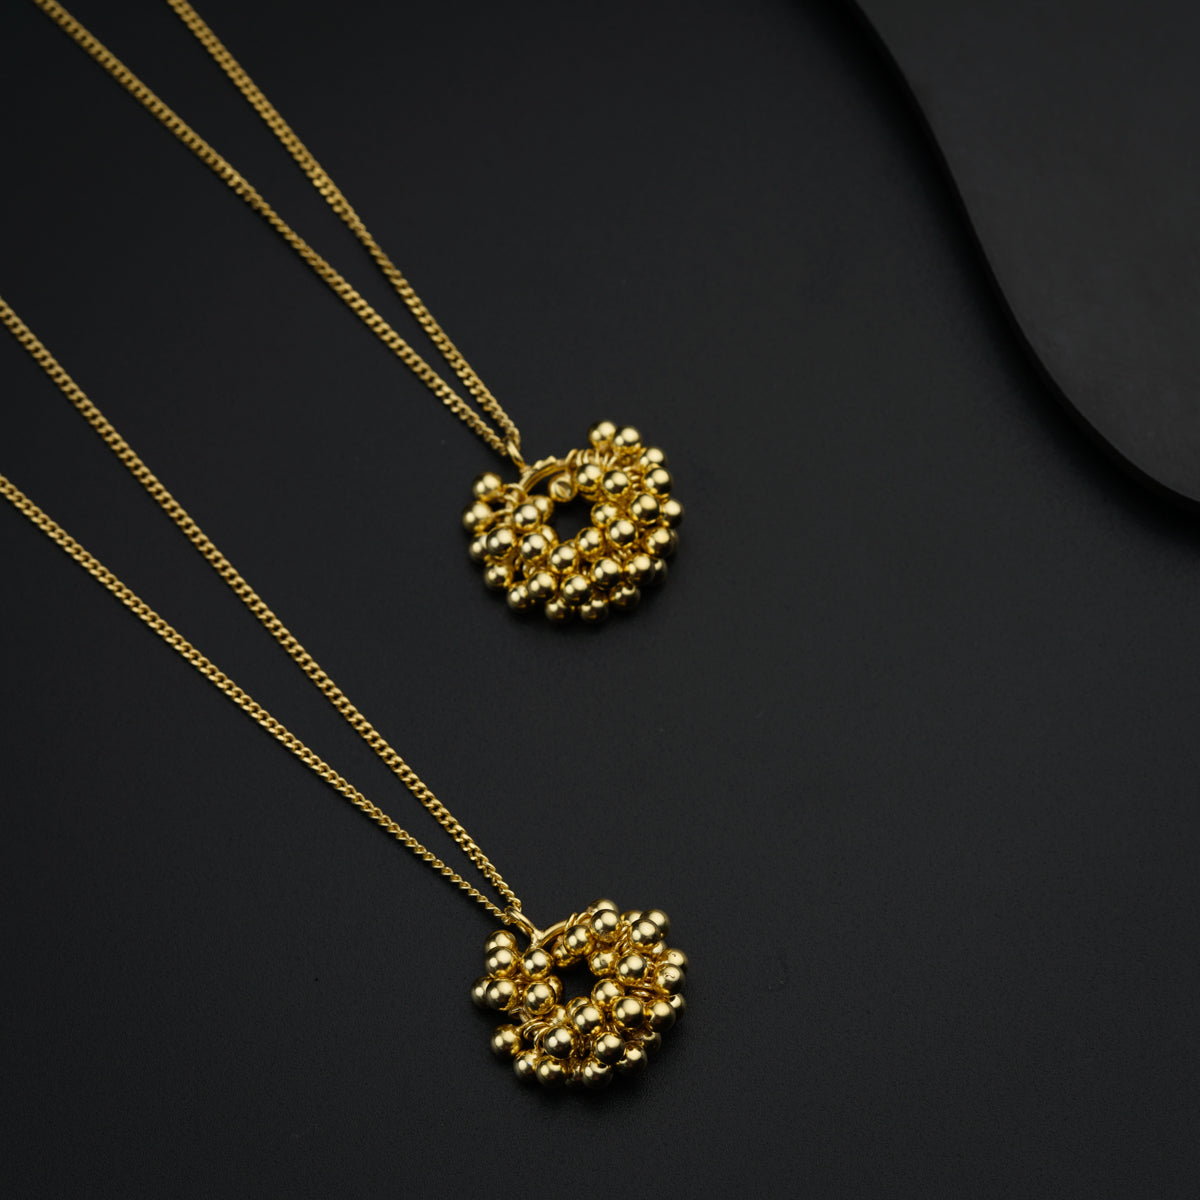 two gold necklaces on a black surface